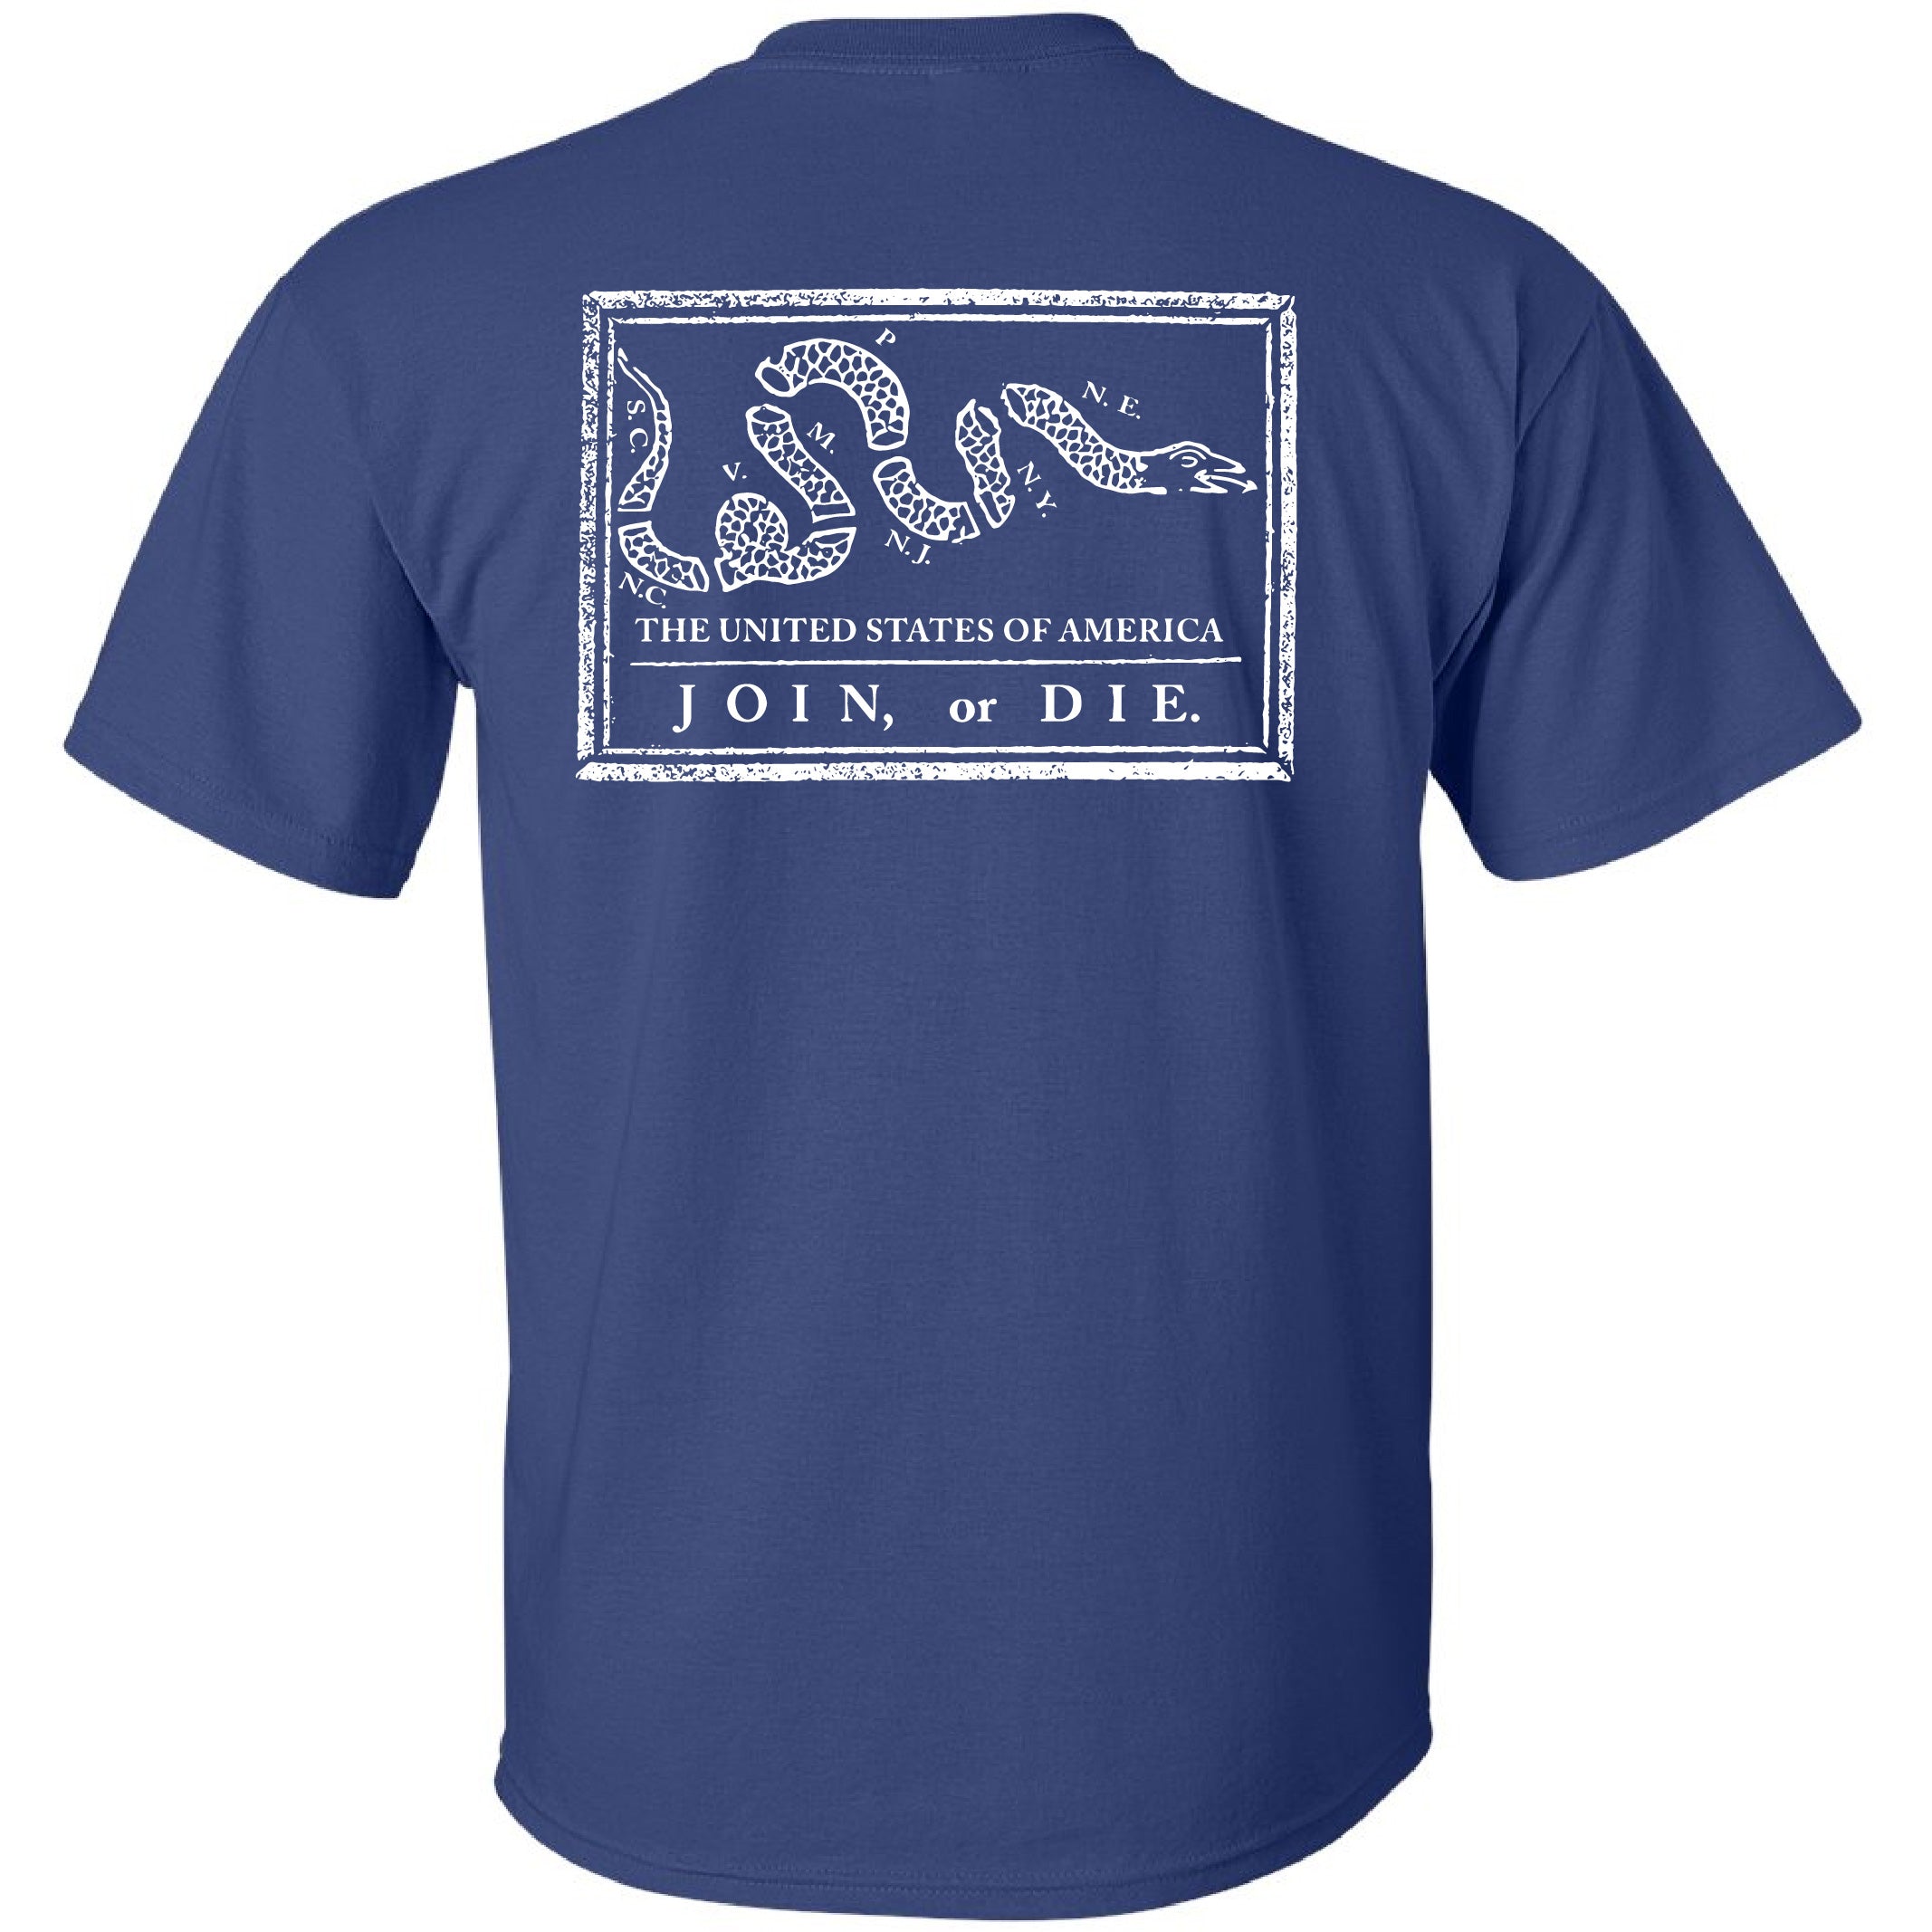 Join or Die T-Shirt - Ben Franklin Woodcut - BLUE